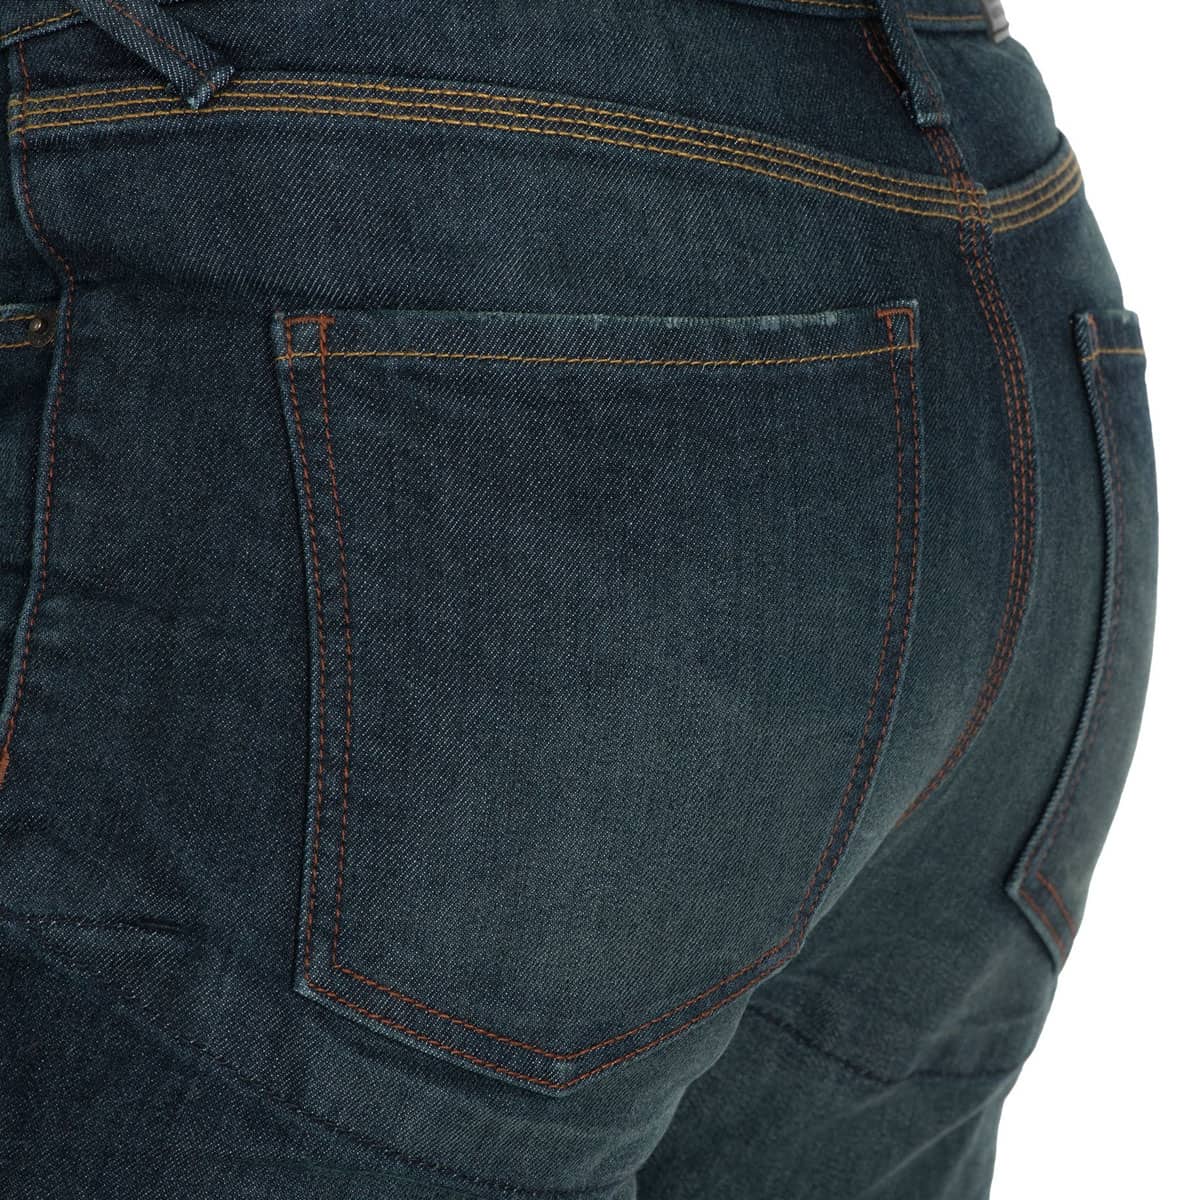 Oxford AAA Original Jeans in a straight fit: CE AAA rated single-layer motorcycle jeans - bottom